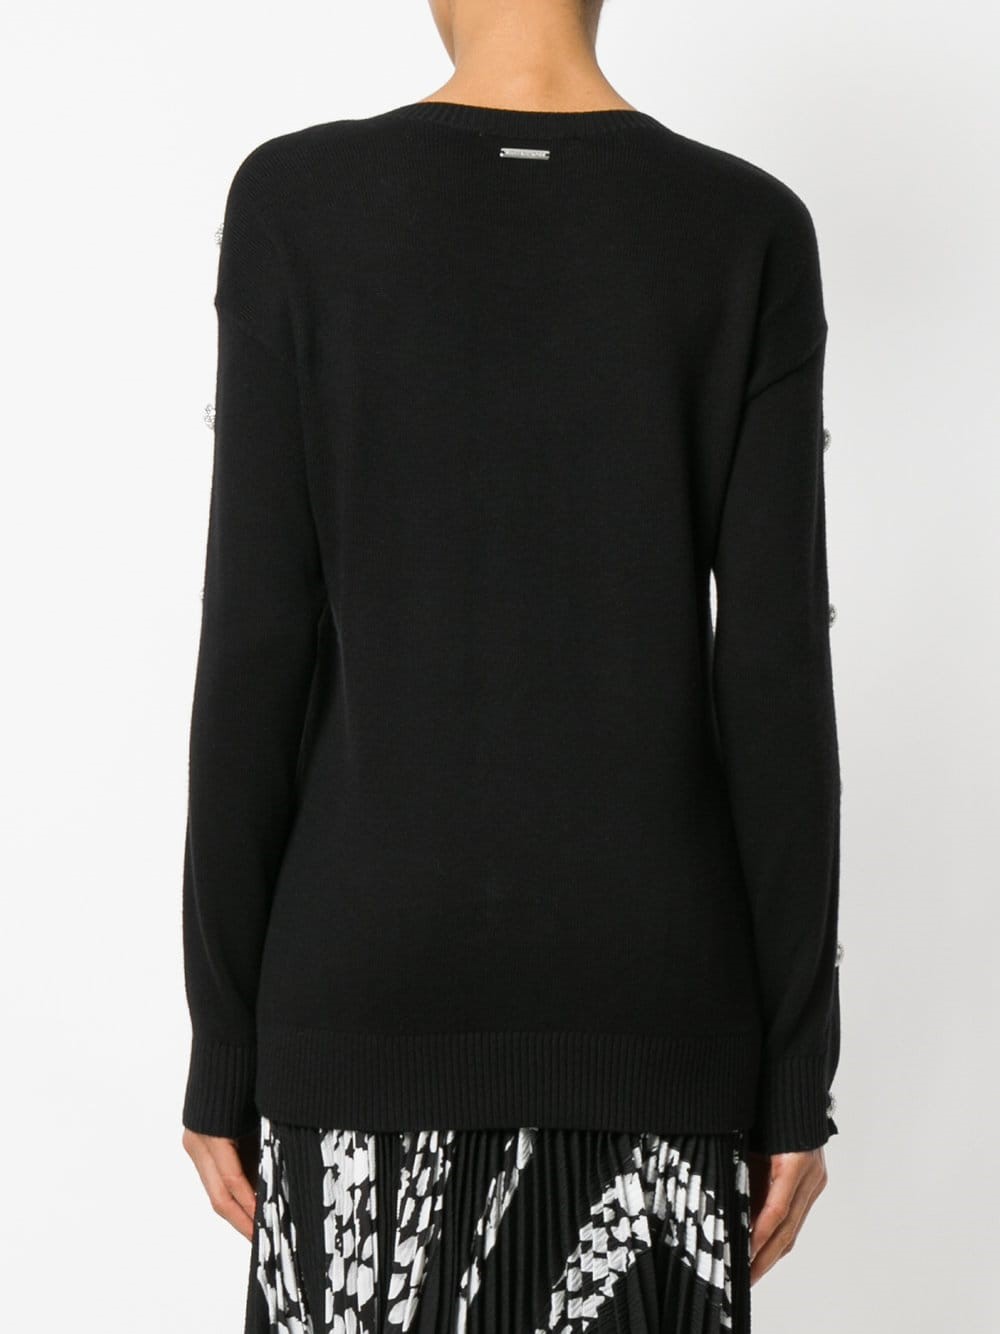 michael kors mk WOMAN SWEATER available on montiboutique.com - 23955